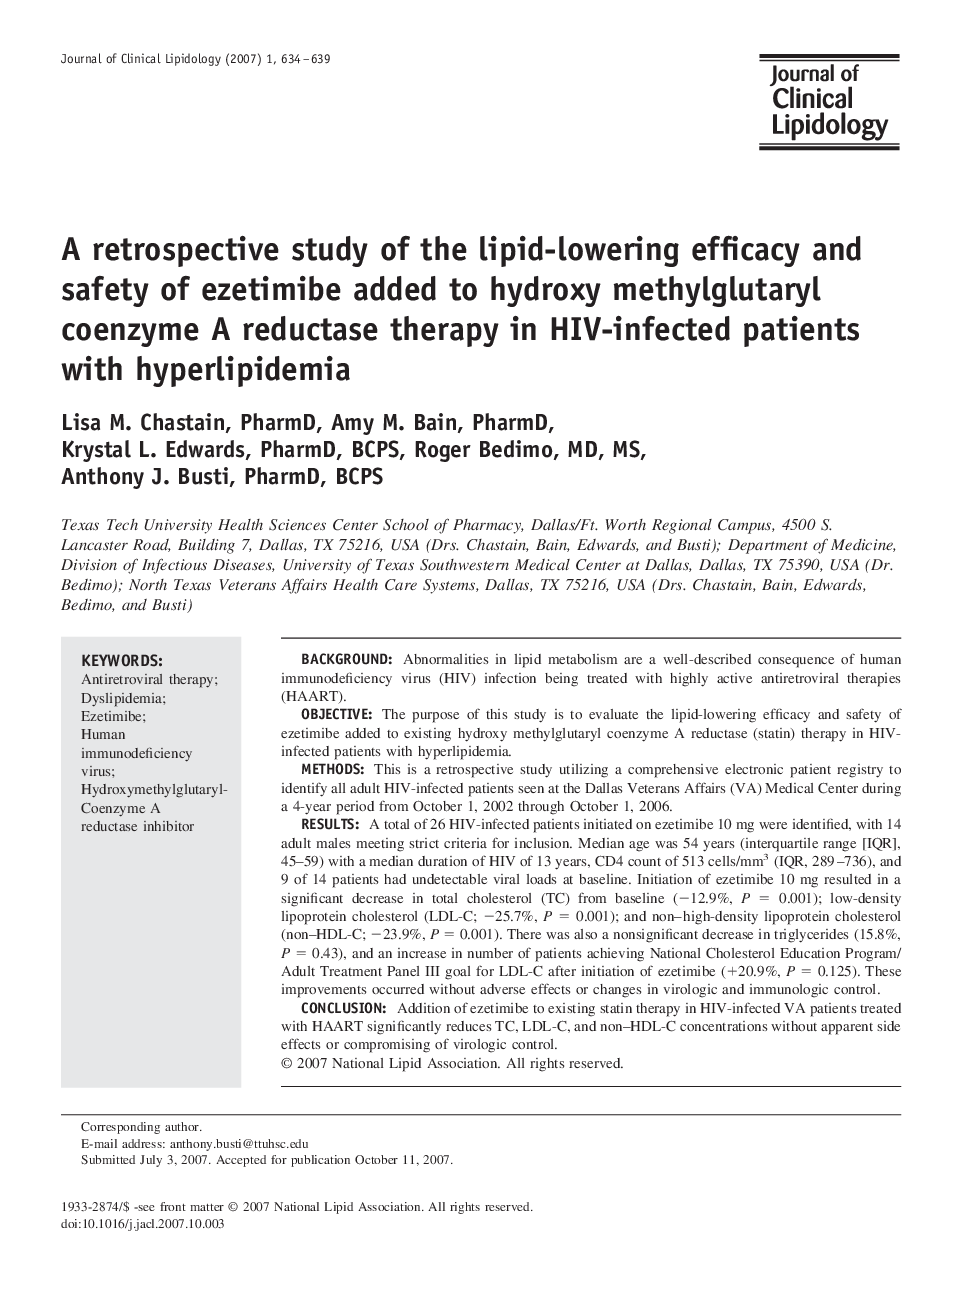 A retrospective study of the lipid-lowering efficacy and safety of ezetimibe added to hydroxy methylglutaryl coenzyme A reductase therapy in HIV-infected patients with hyperlipidemia 